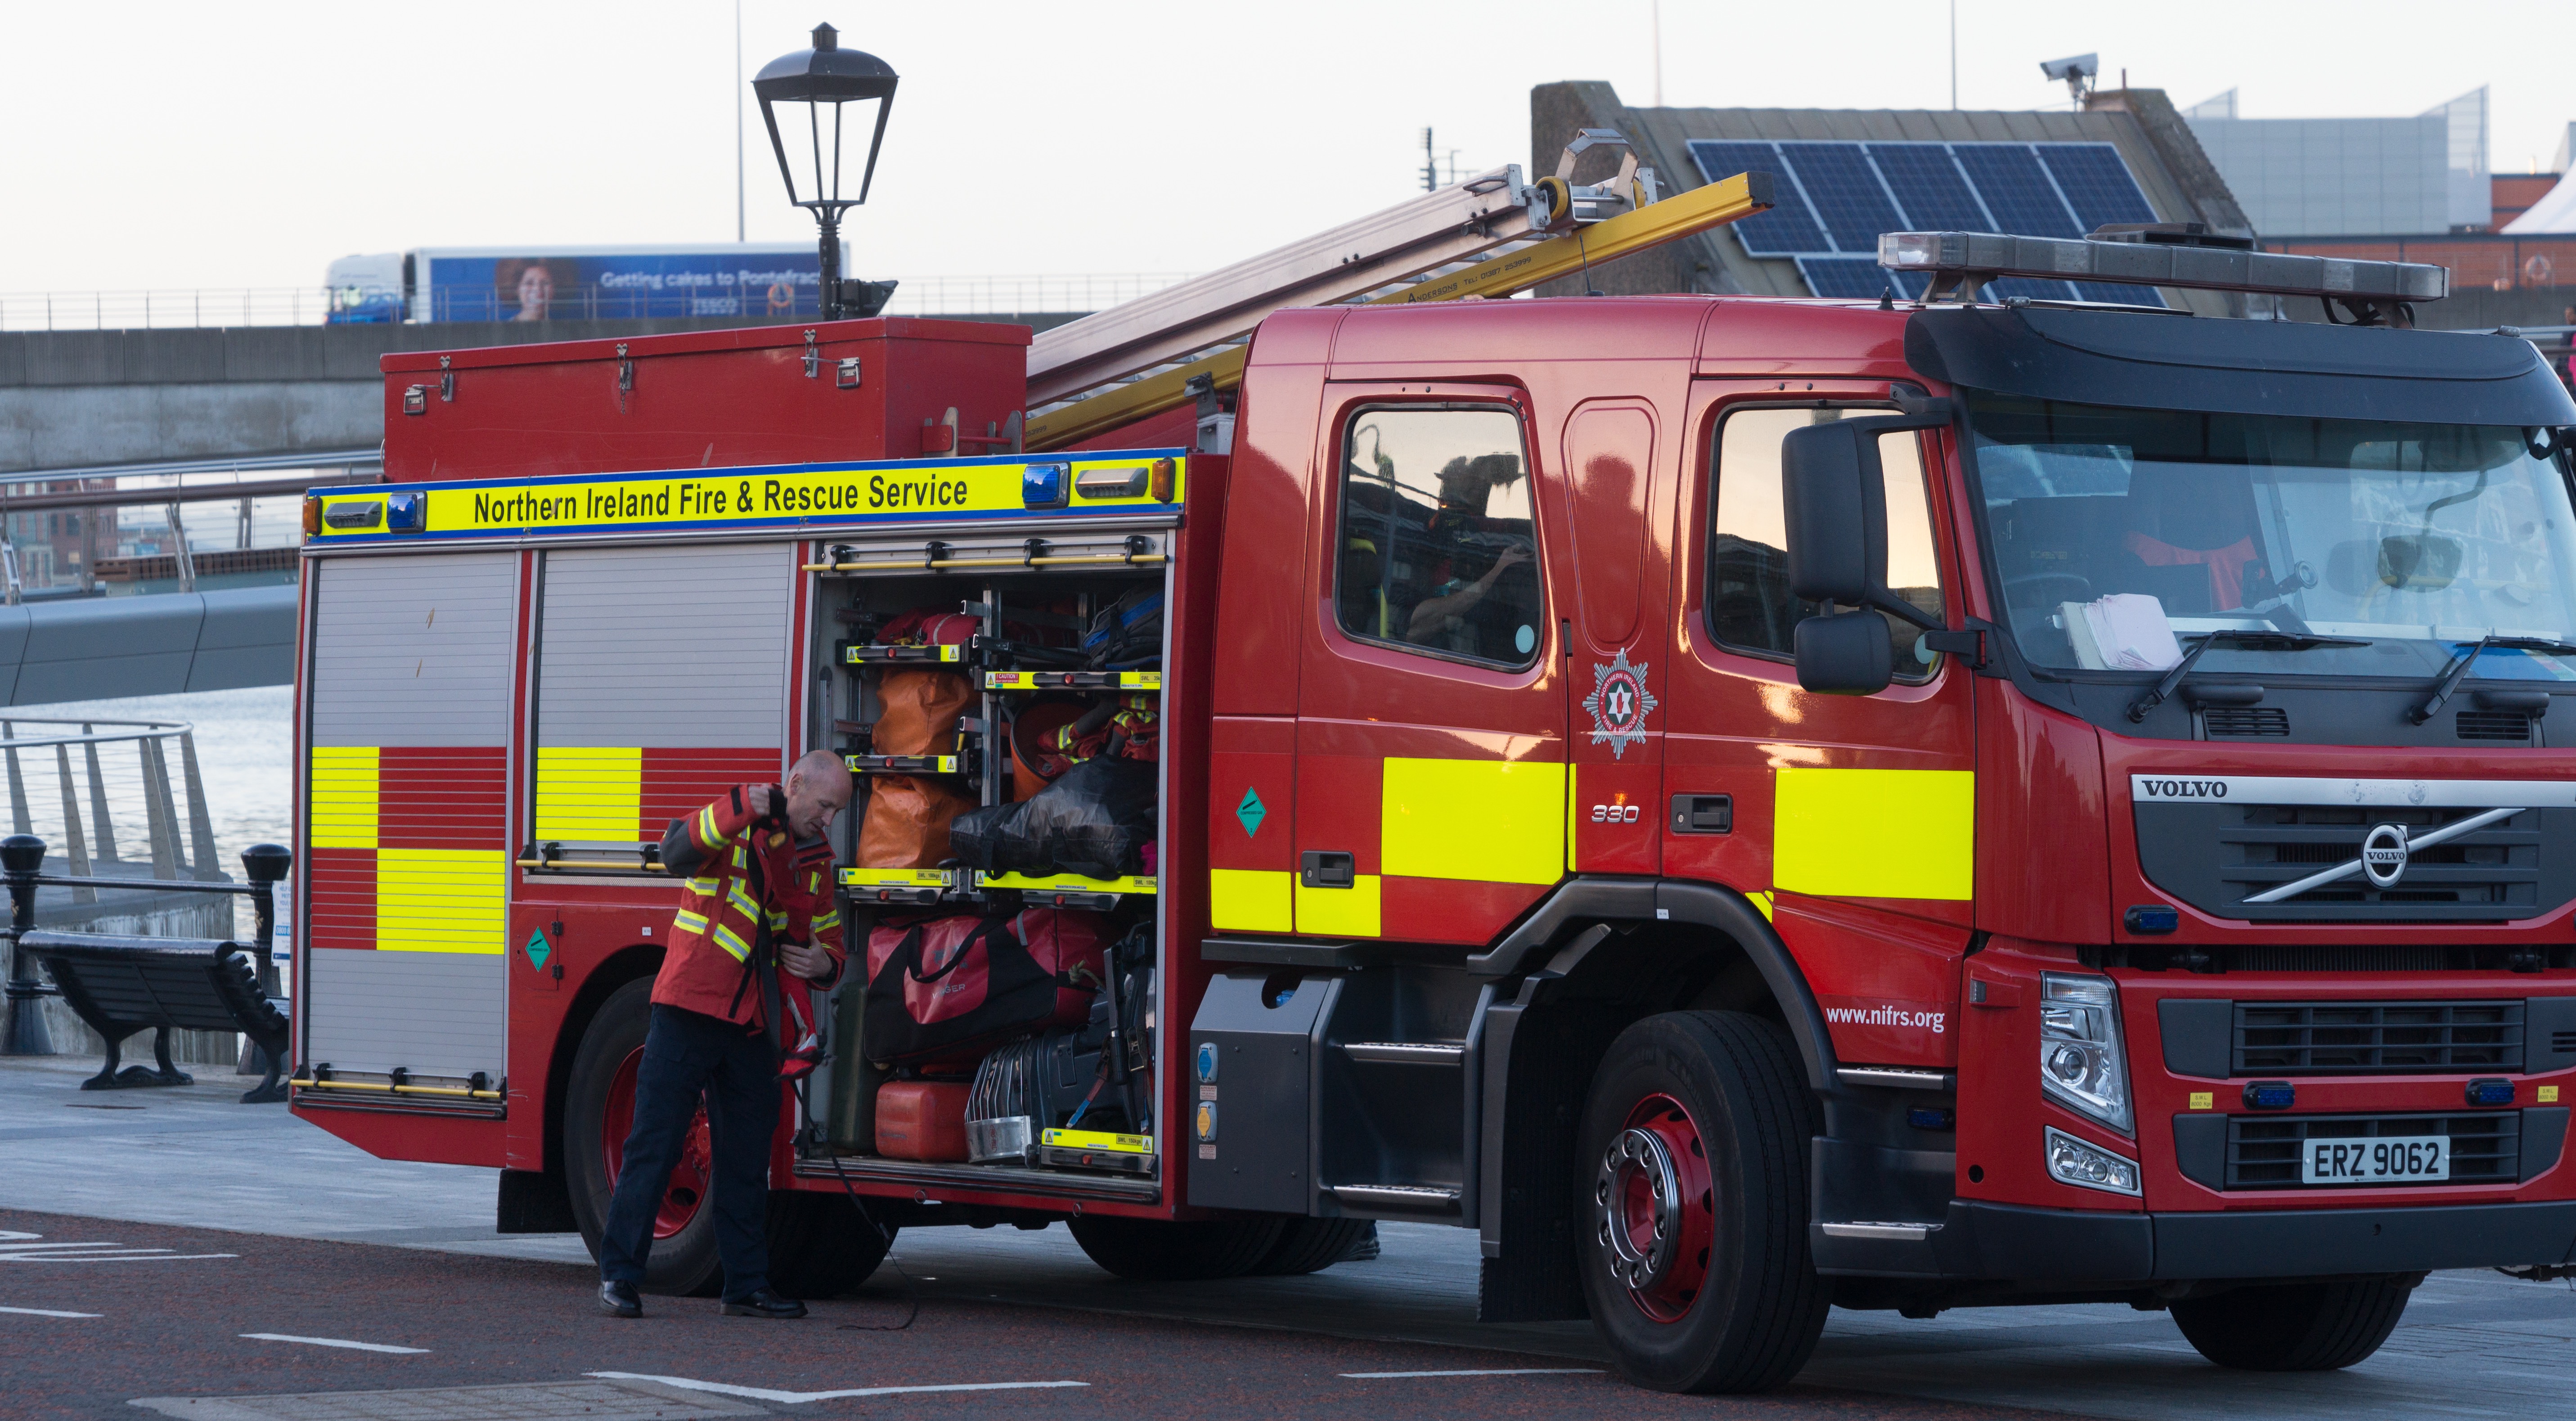 NORTHERN IRELAND FIRE AND RESCUE SERVICE IN BELFAST  003